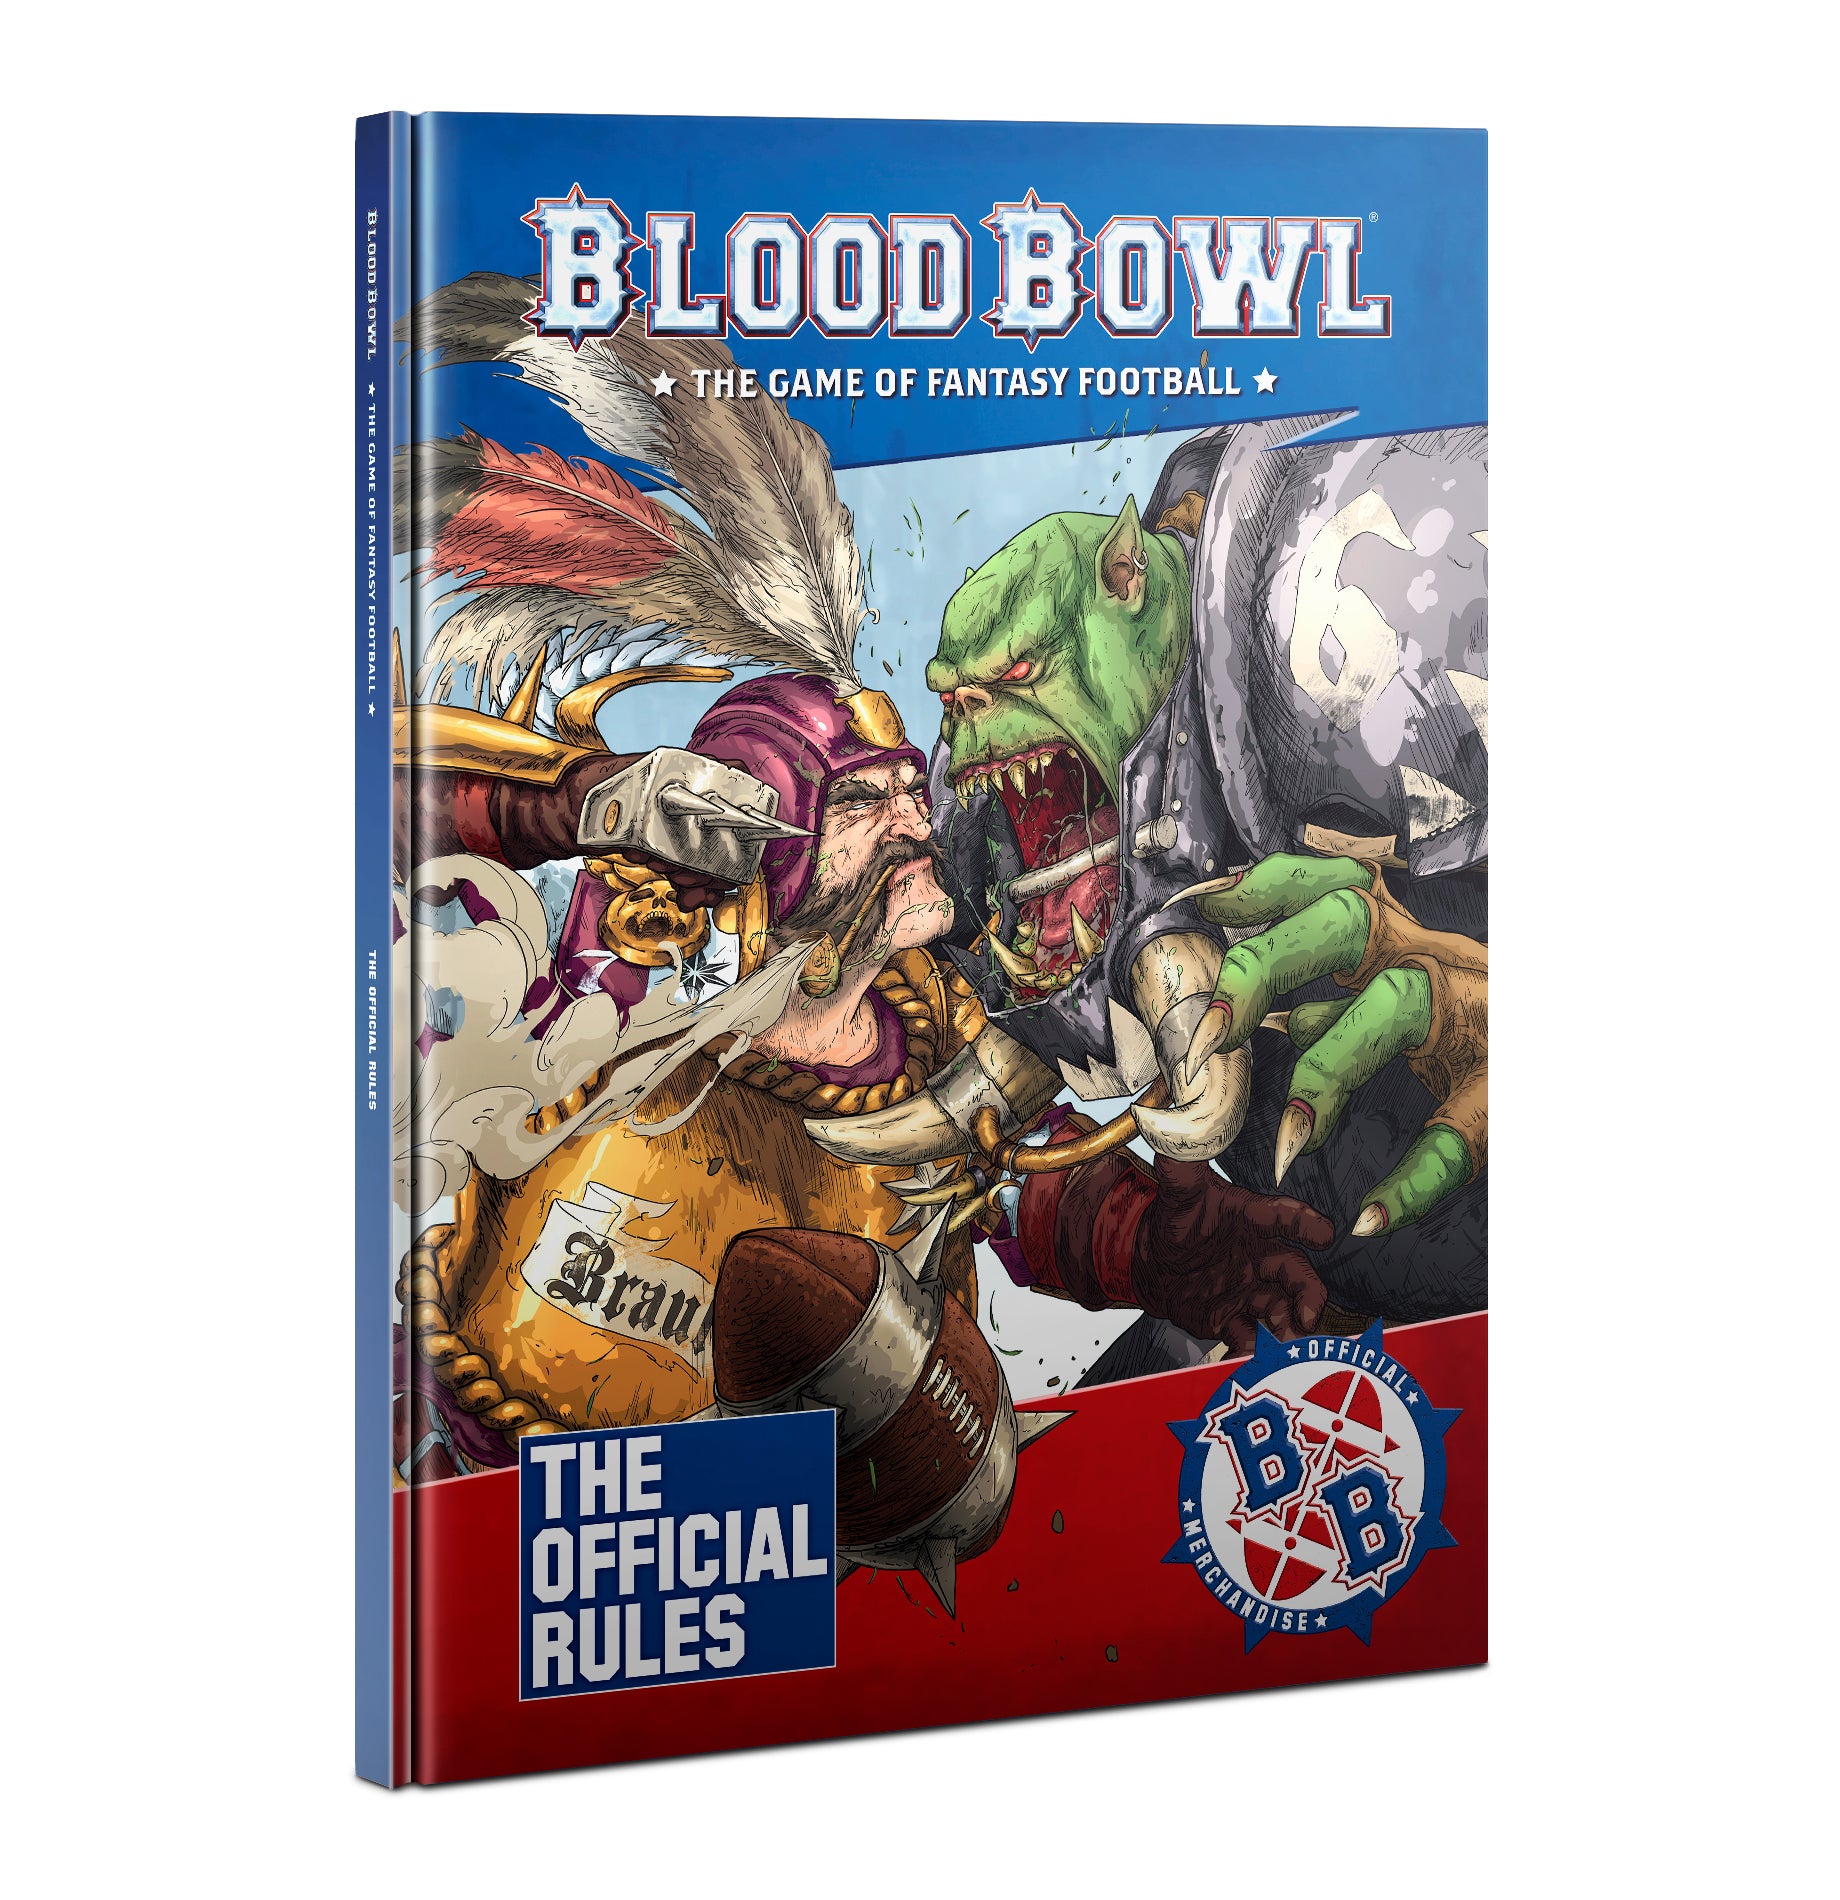 Blood Bowl: The Official Rules